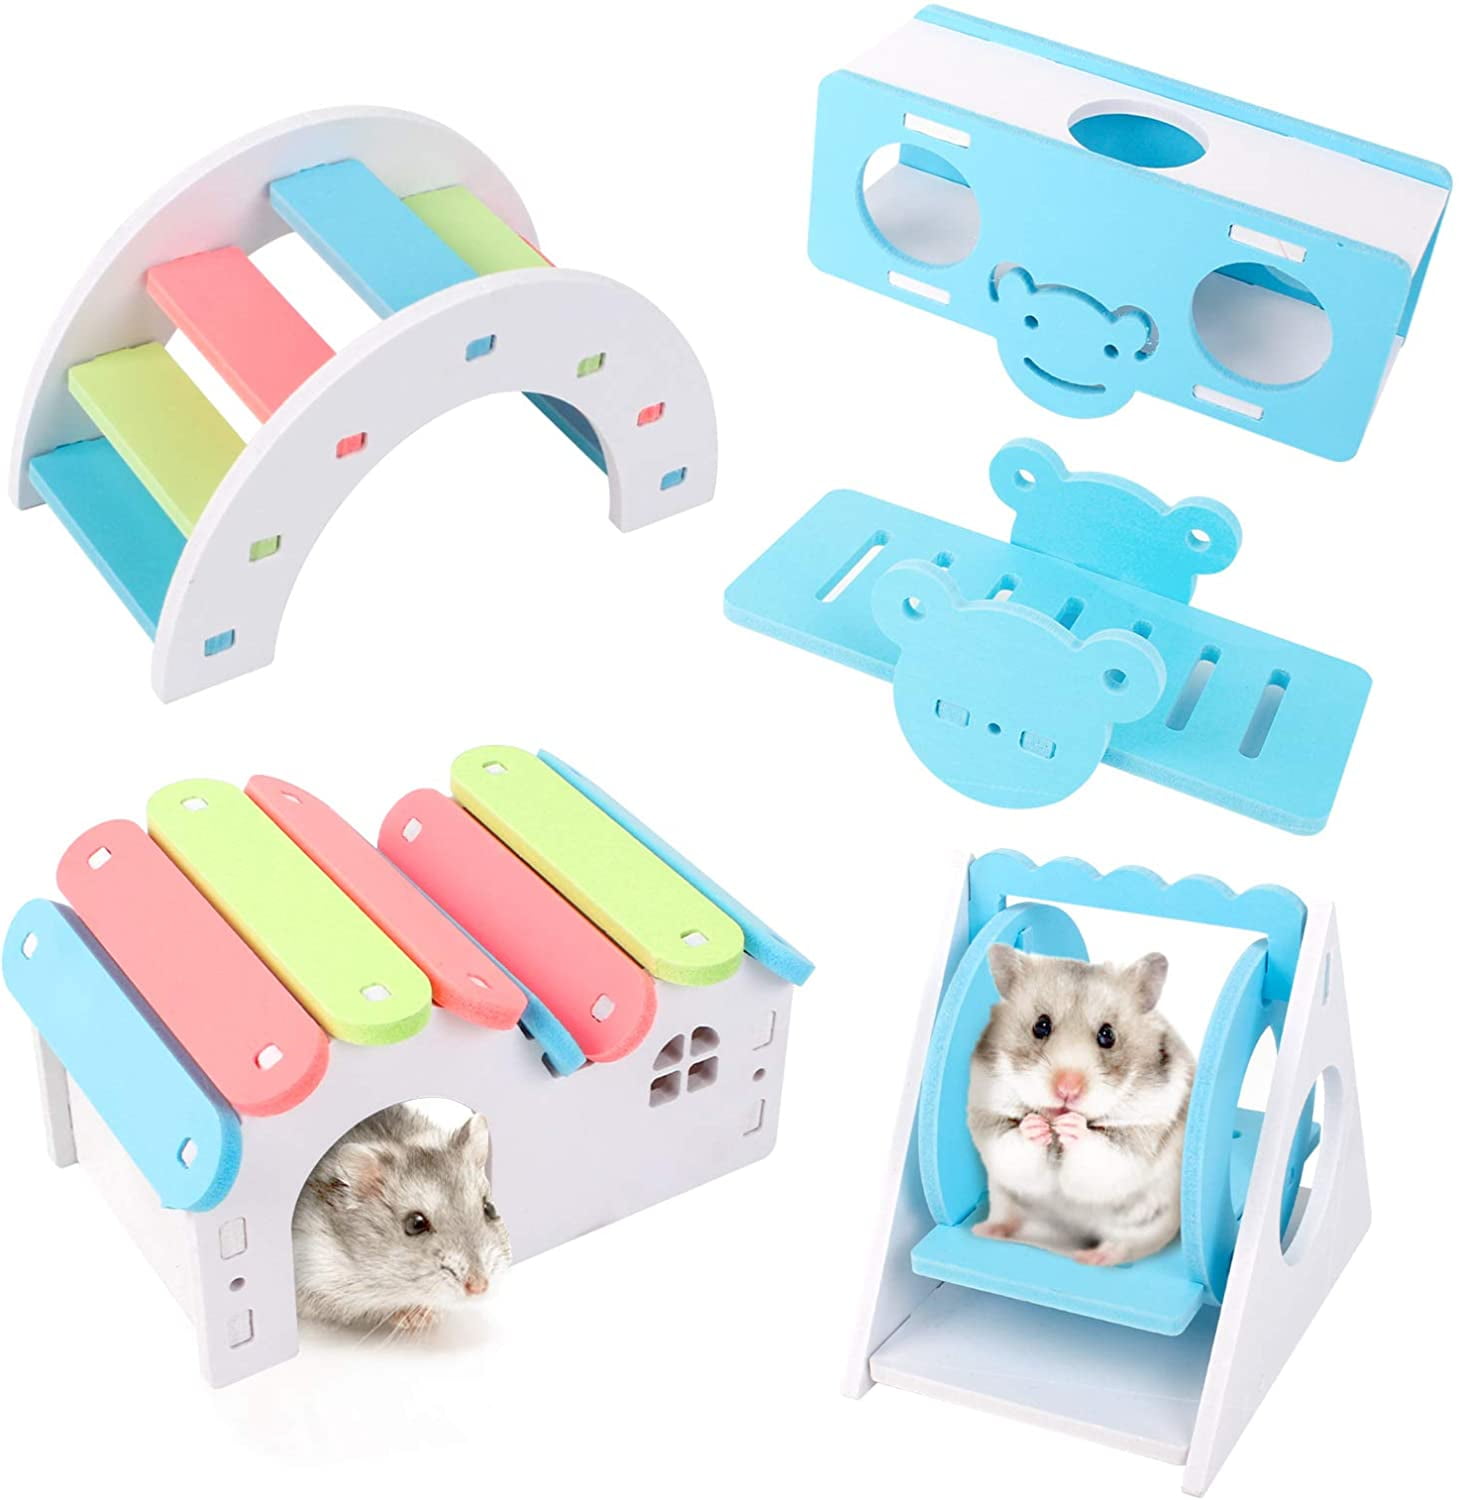 Pet Sport Exercise Toys Set Hamster Cage Accessories for Gerbil Mouse and Small Animals DIY Wooden Hamster Hideout House Rainbow Bridge Hideout Swing and Seesaw Snail House 5 Pcs Hamster Toys Set Rainbow 